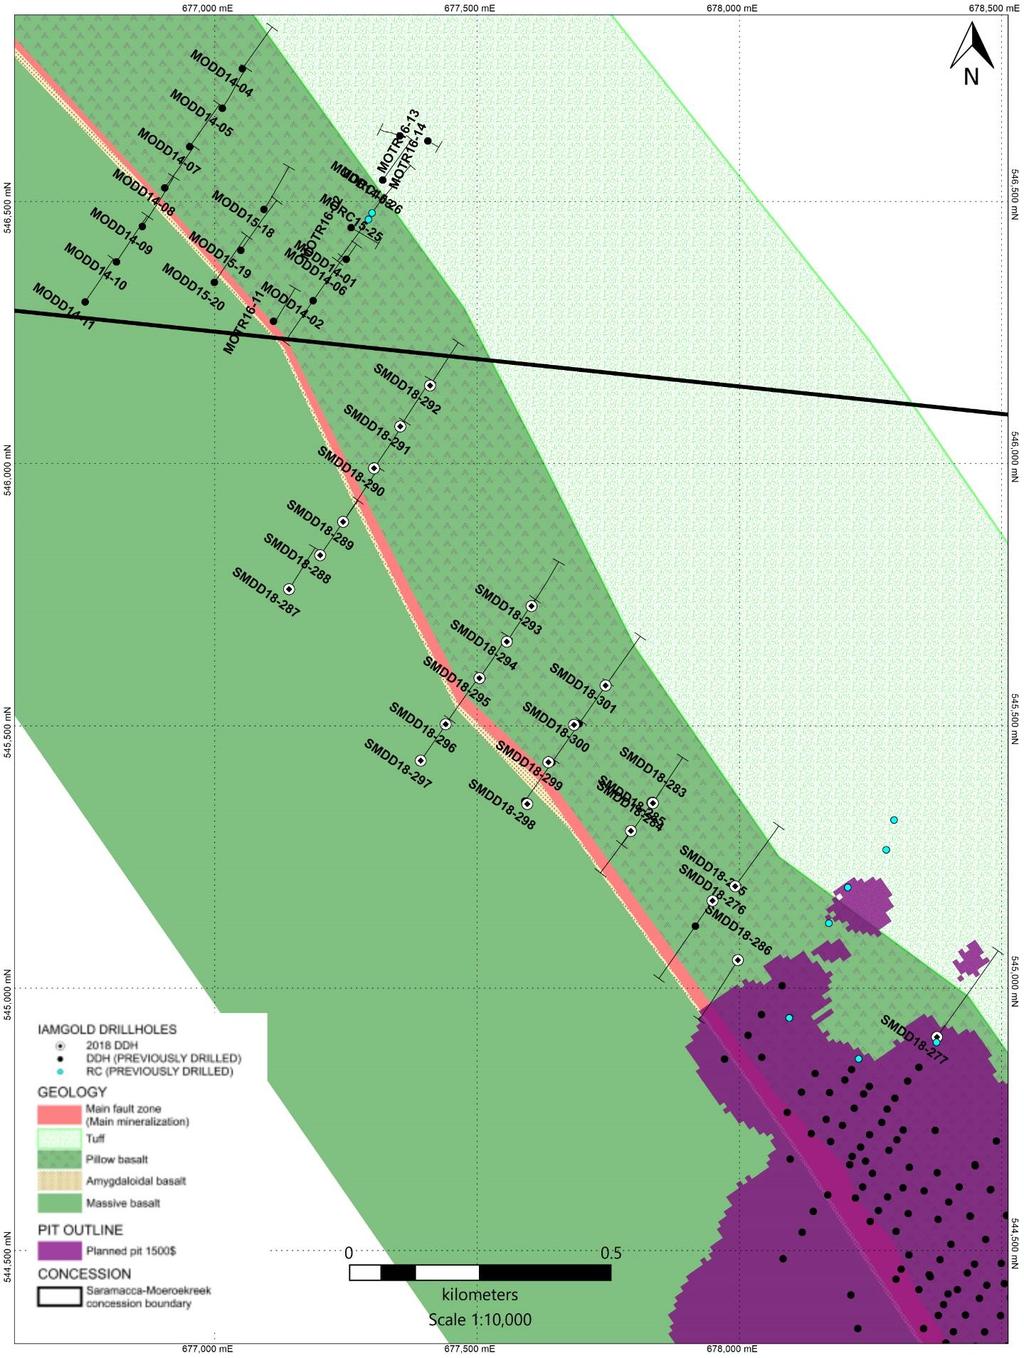 Figure 1: Saramacca Northwest Extension Drill Hole Plan with Significant Intersects MODD14-07 4.5m at 3.07 g/t Au MODD15-18 3.0m at 0.87 g/t Au 3.0m at 1.96 g/t Au MODD14-06 10.5m at 0.93 g/t Au 10.